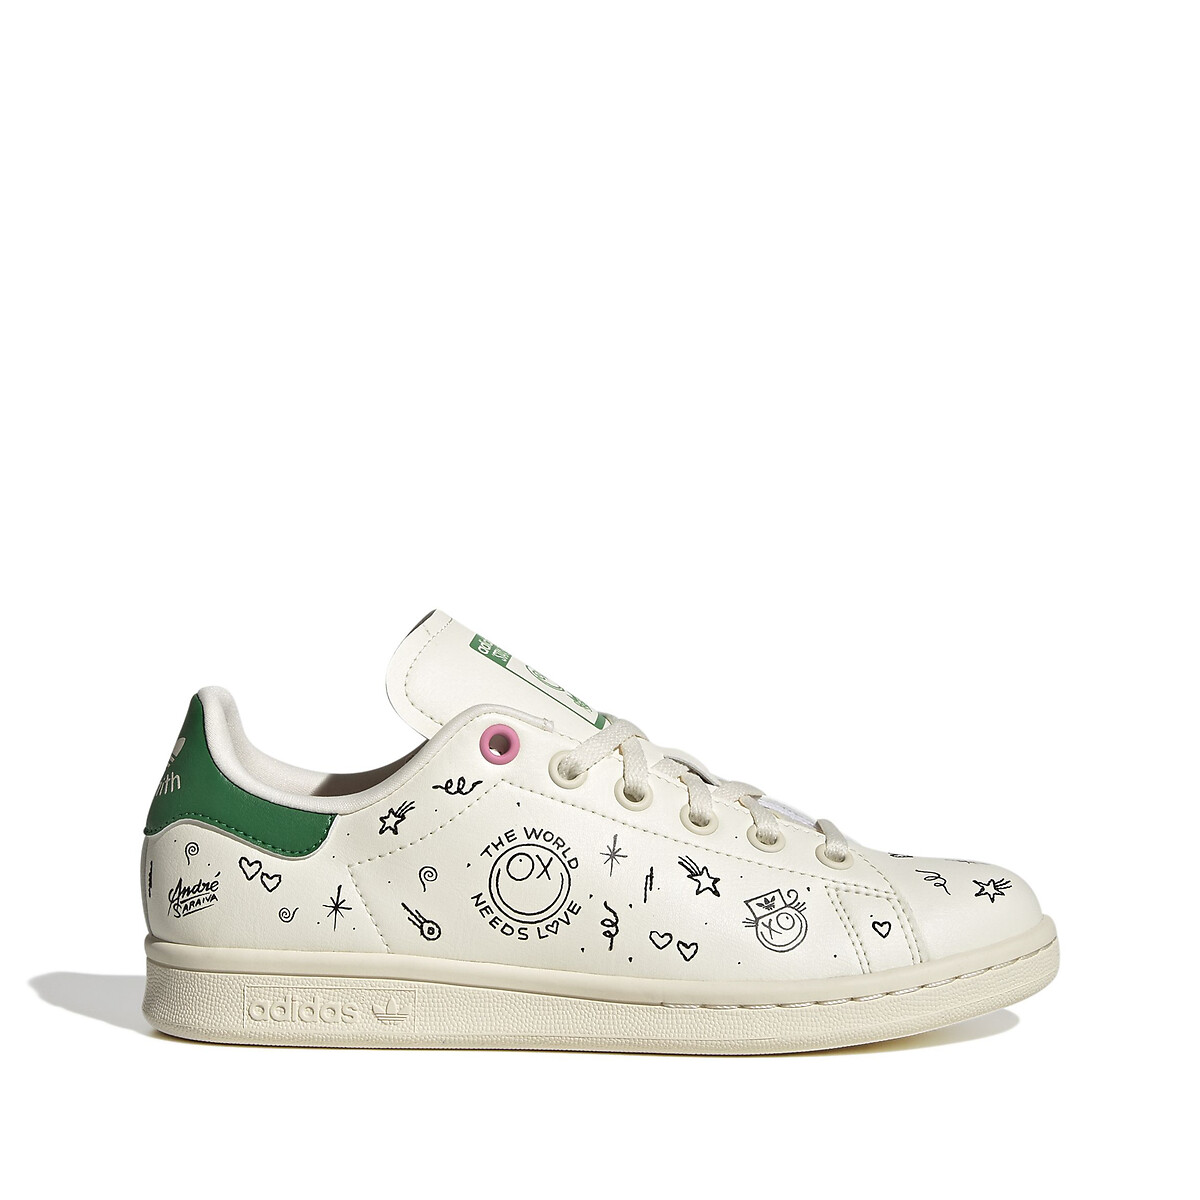 Sneakers stan smith crème wit Adidas Originals | Redoute